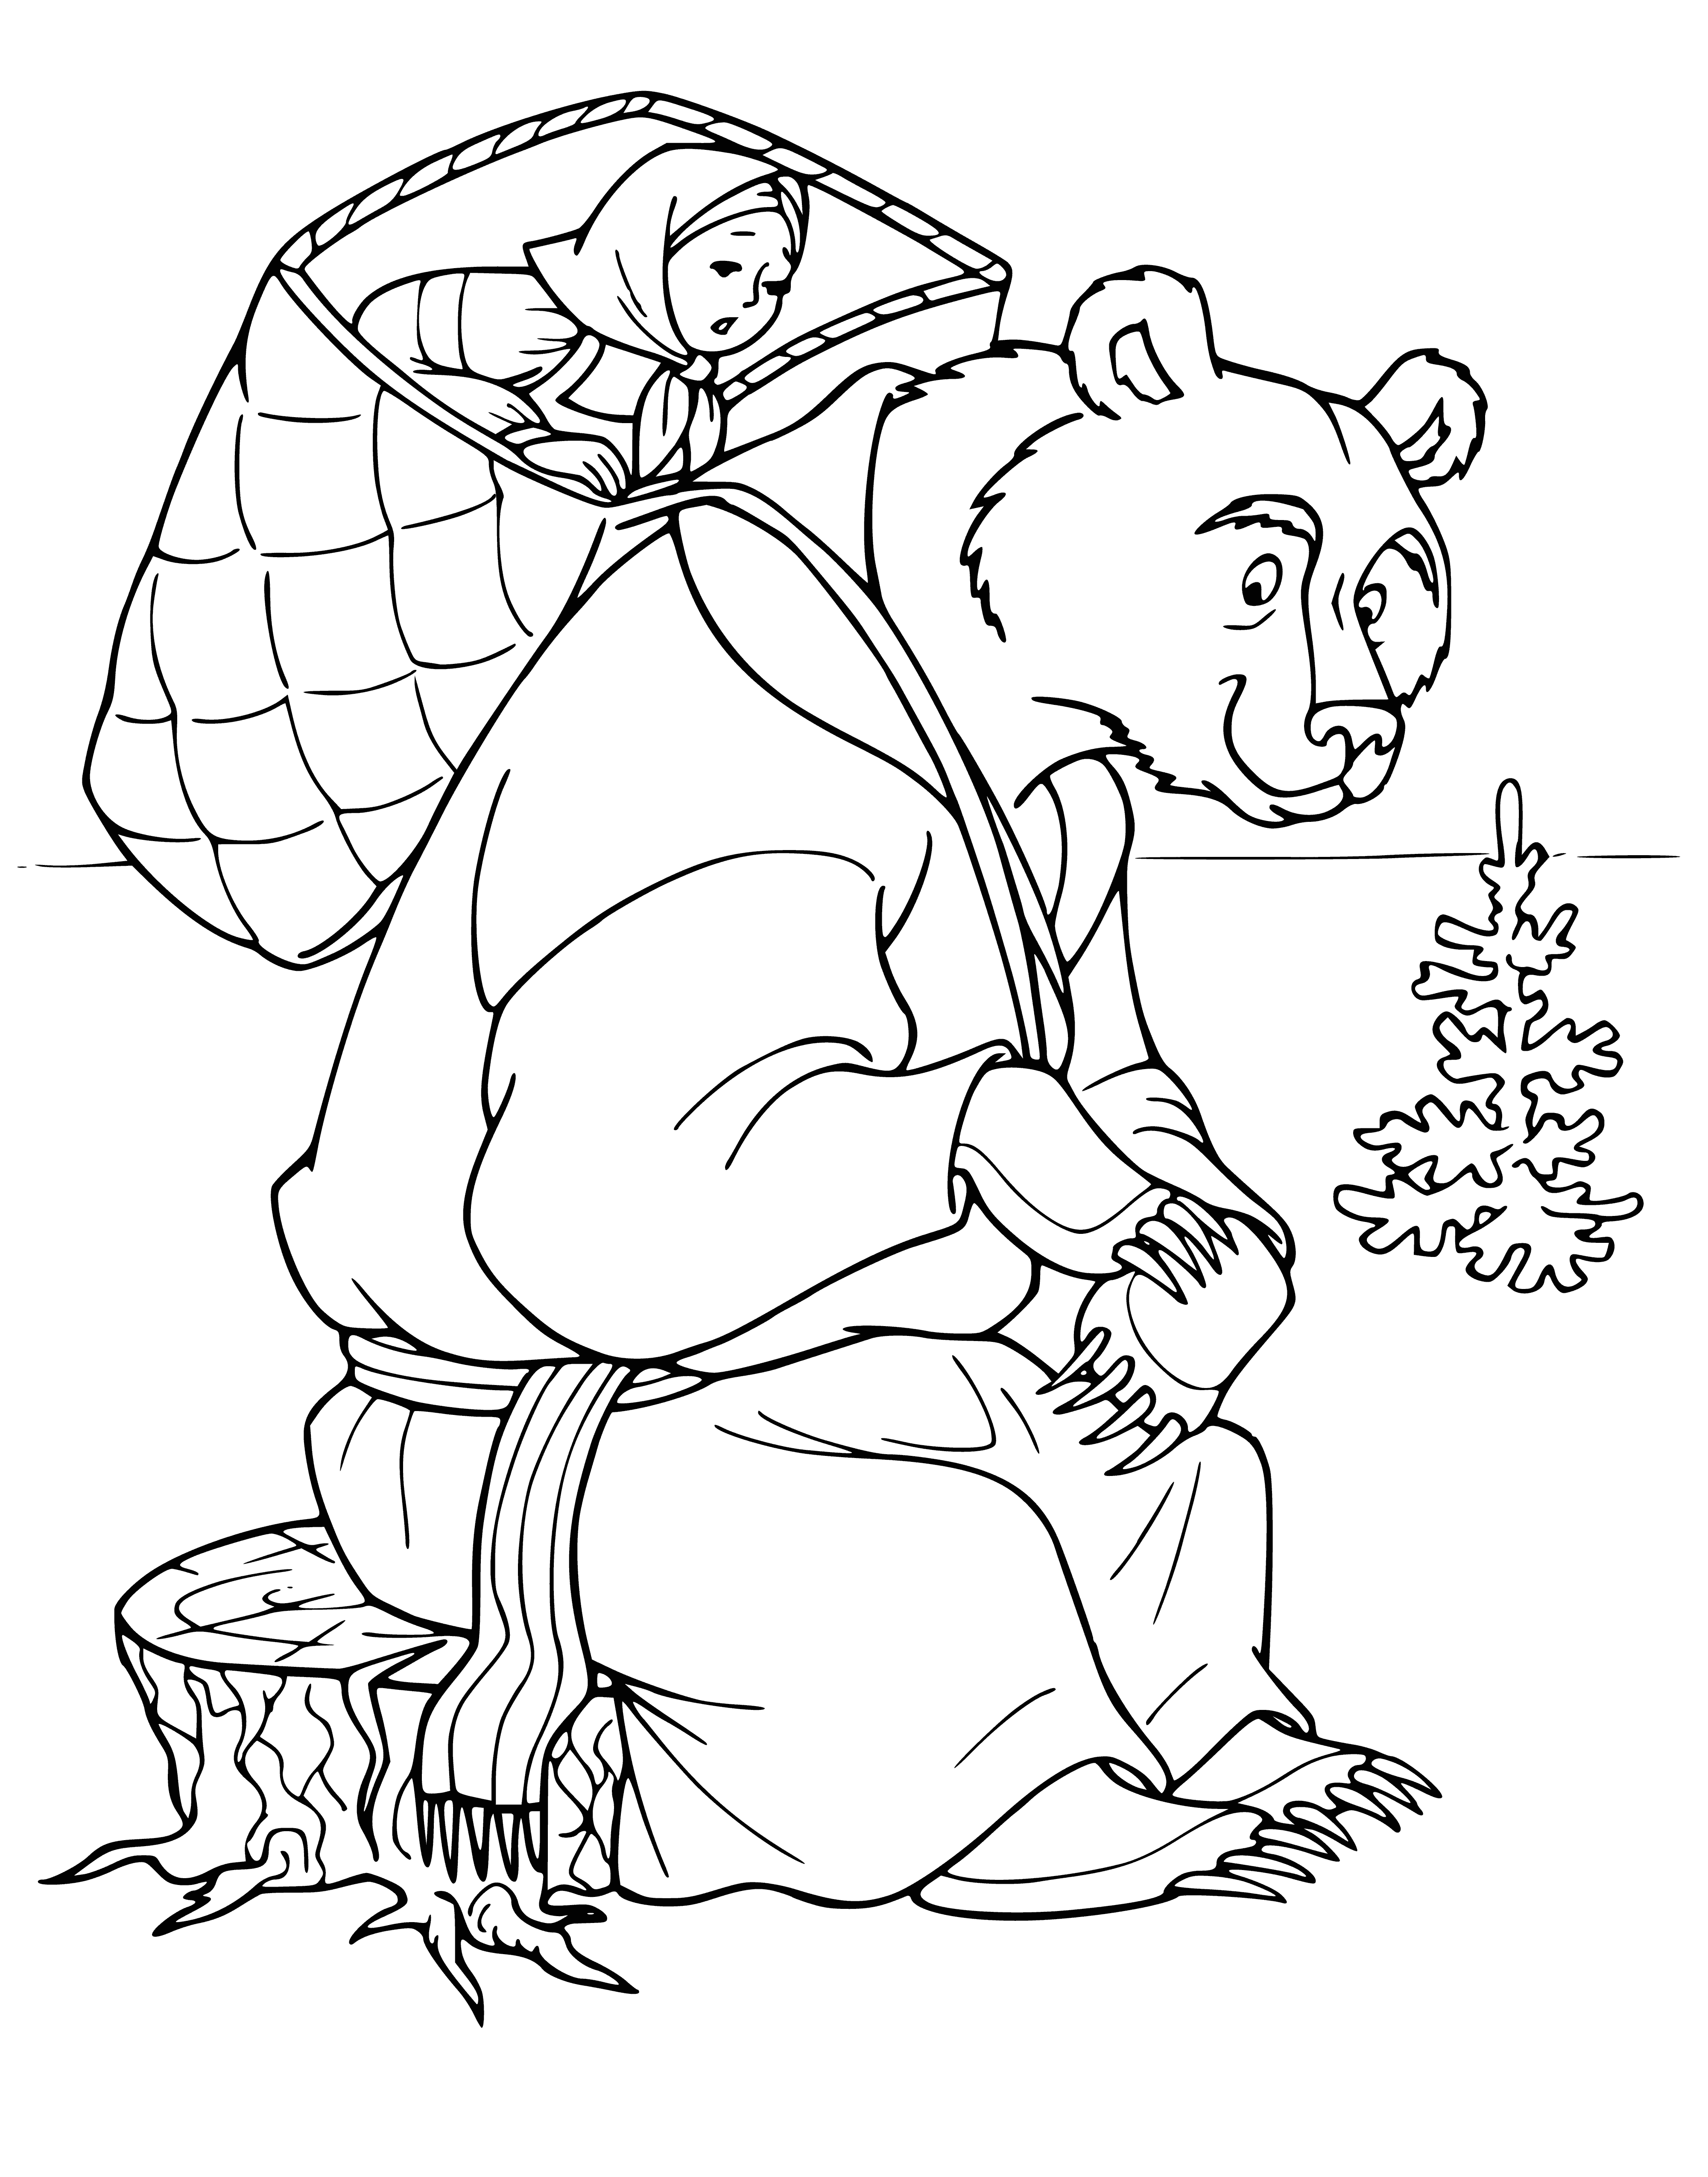 Bear on a stump coloring page